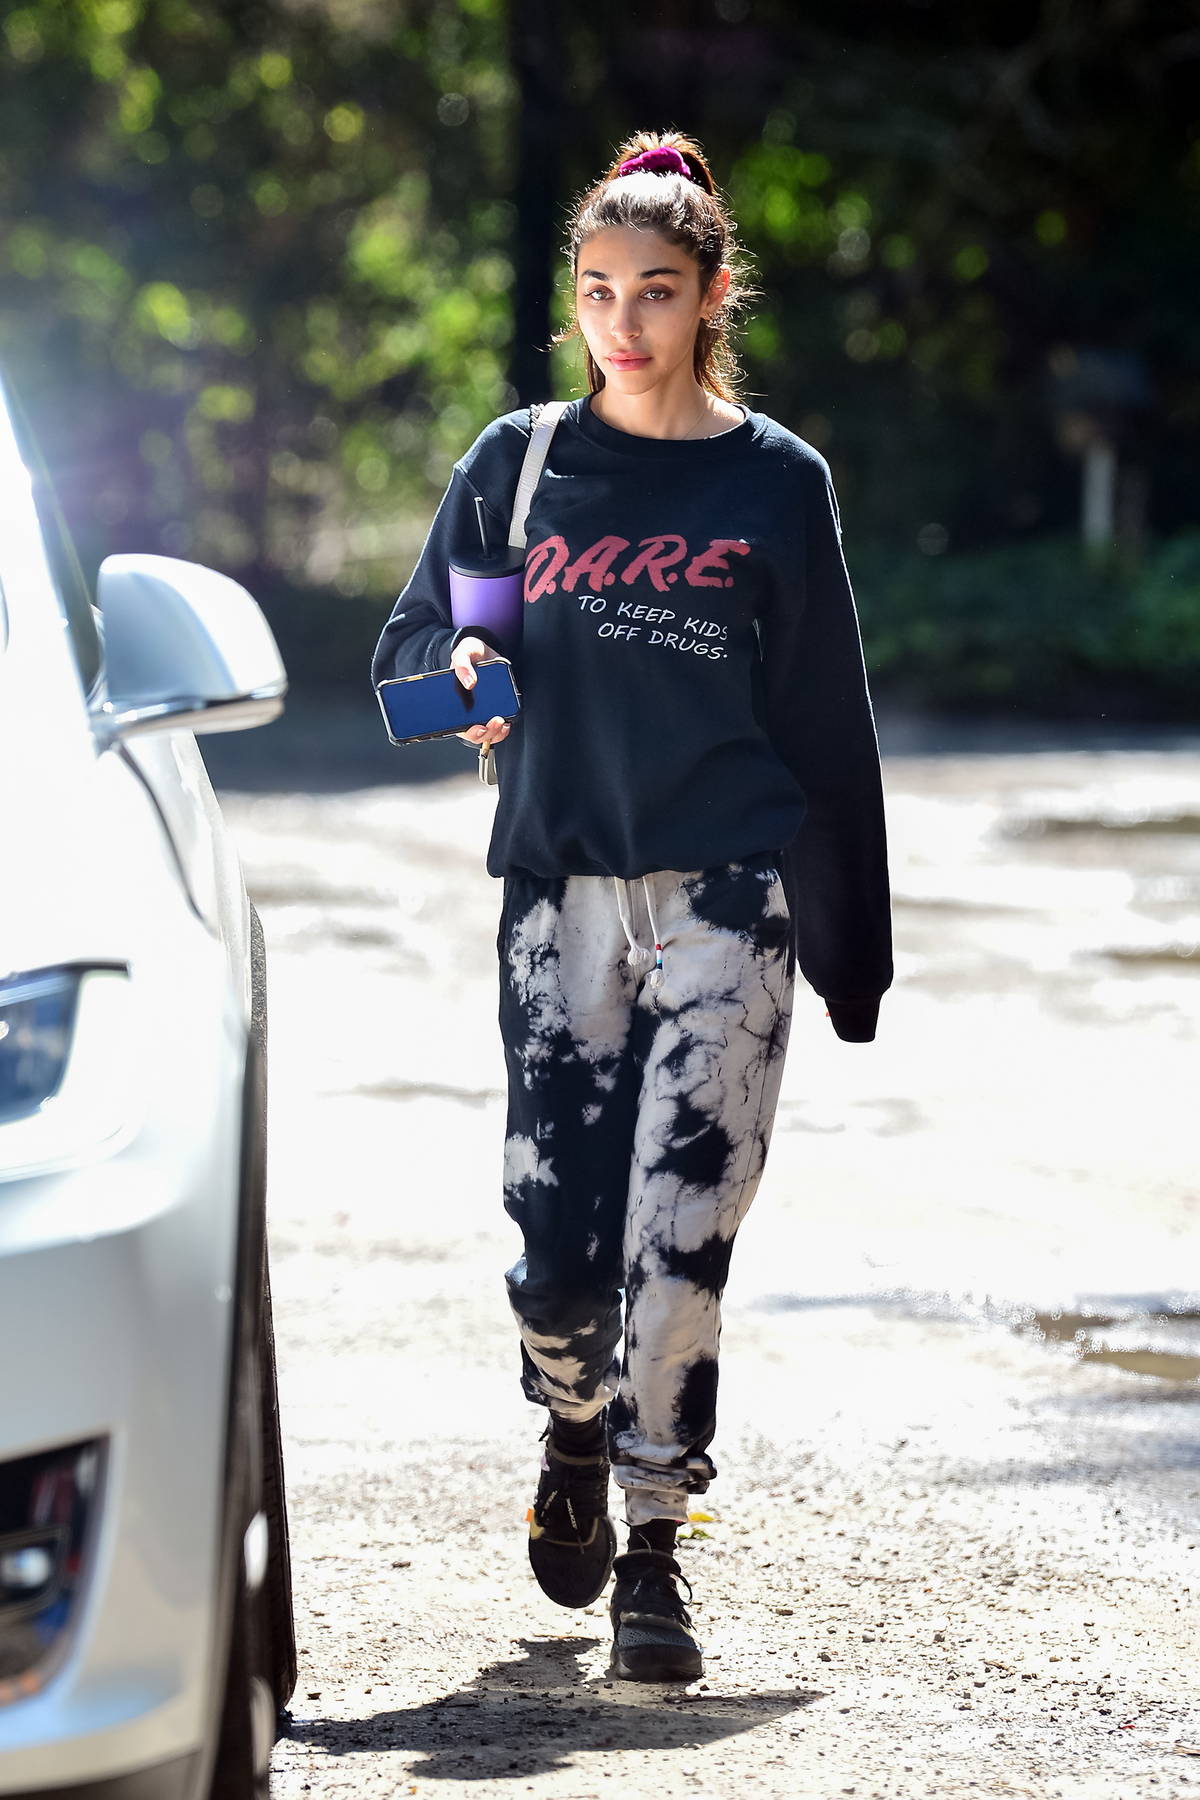 Chantel Jeffries looks fit in blue Alo Yoga outfit as she leaves